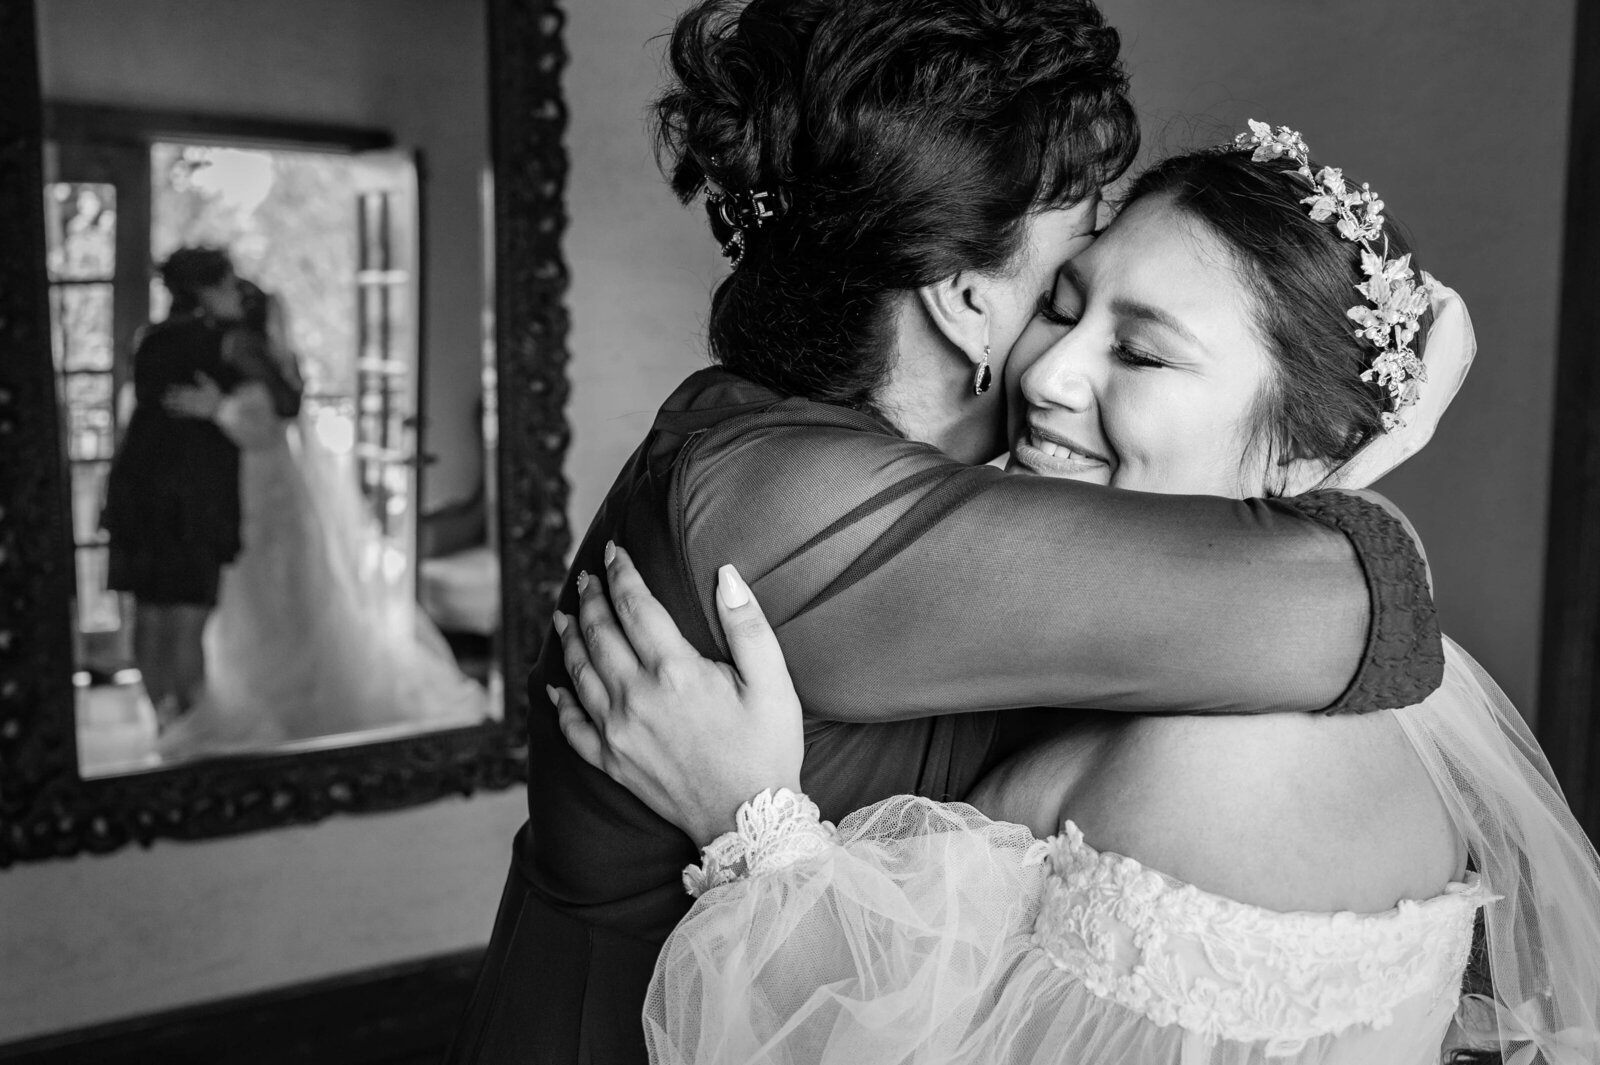 Bride and her mom sharing a big hug and emotional moment during getting ready on the wedding day.